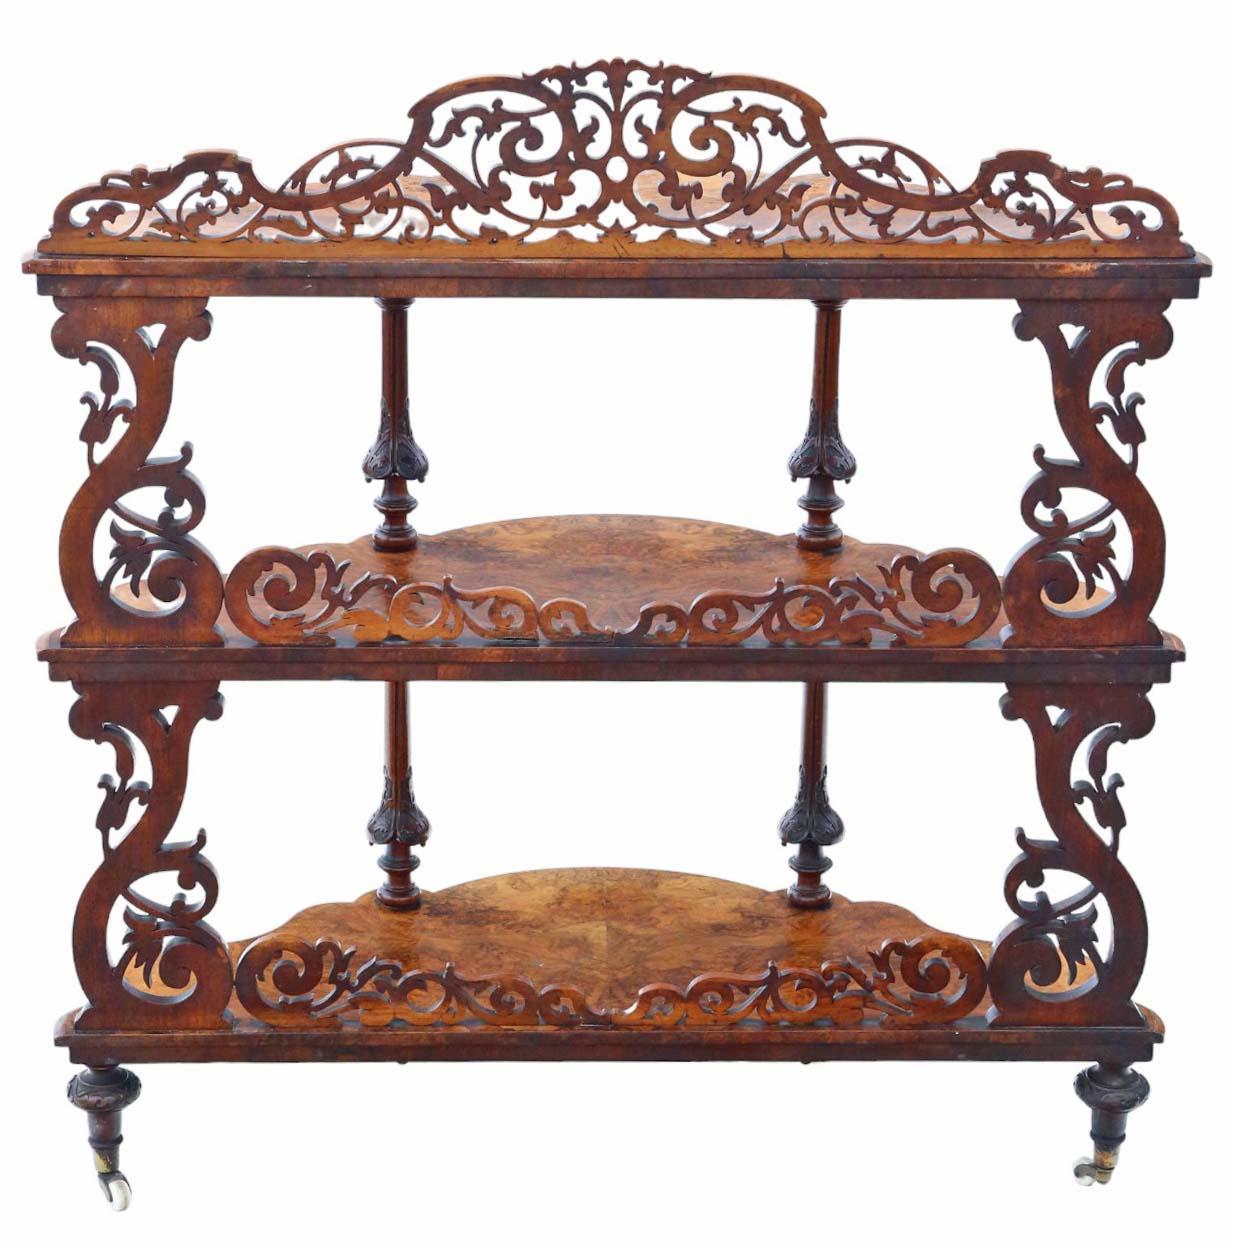 19th Century Burr Walnut Demi-Lune Console Table Quality Antique display serving For Sale 4